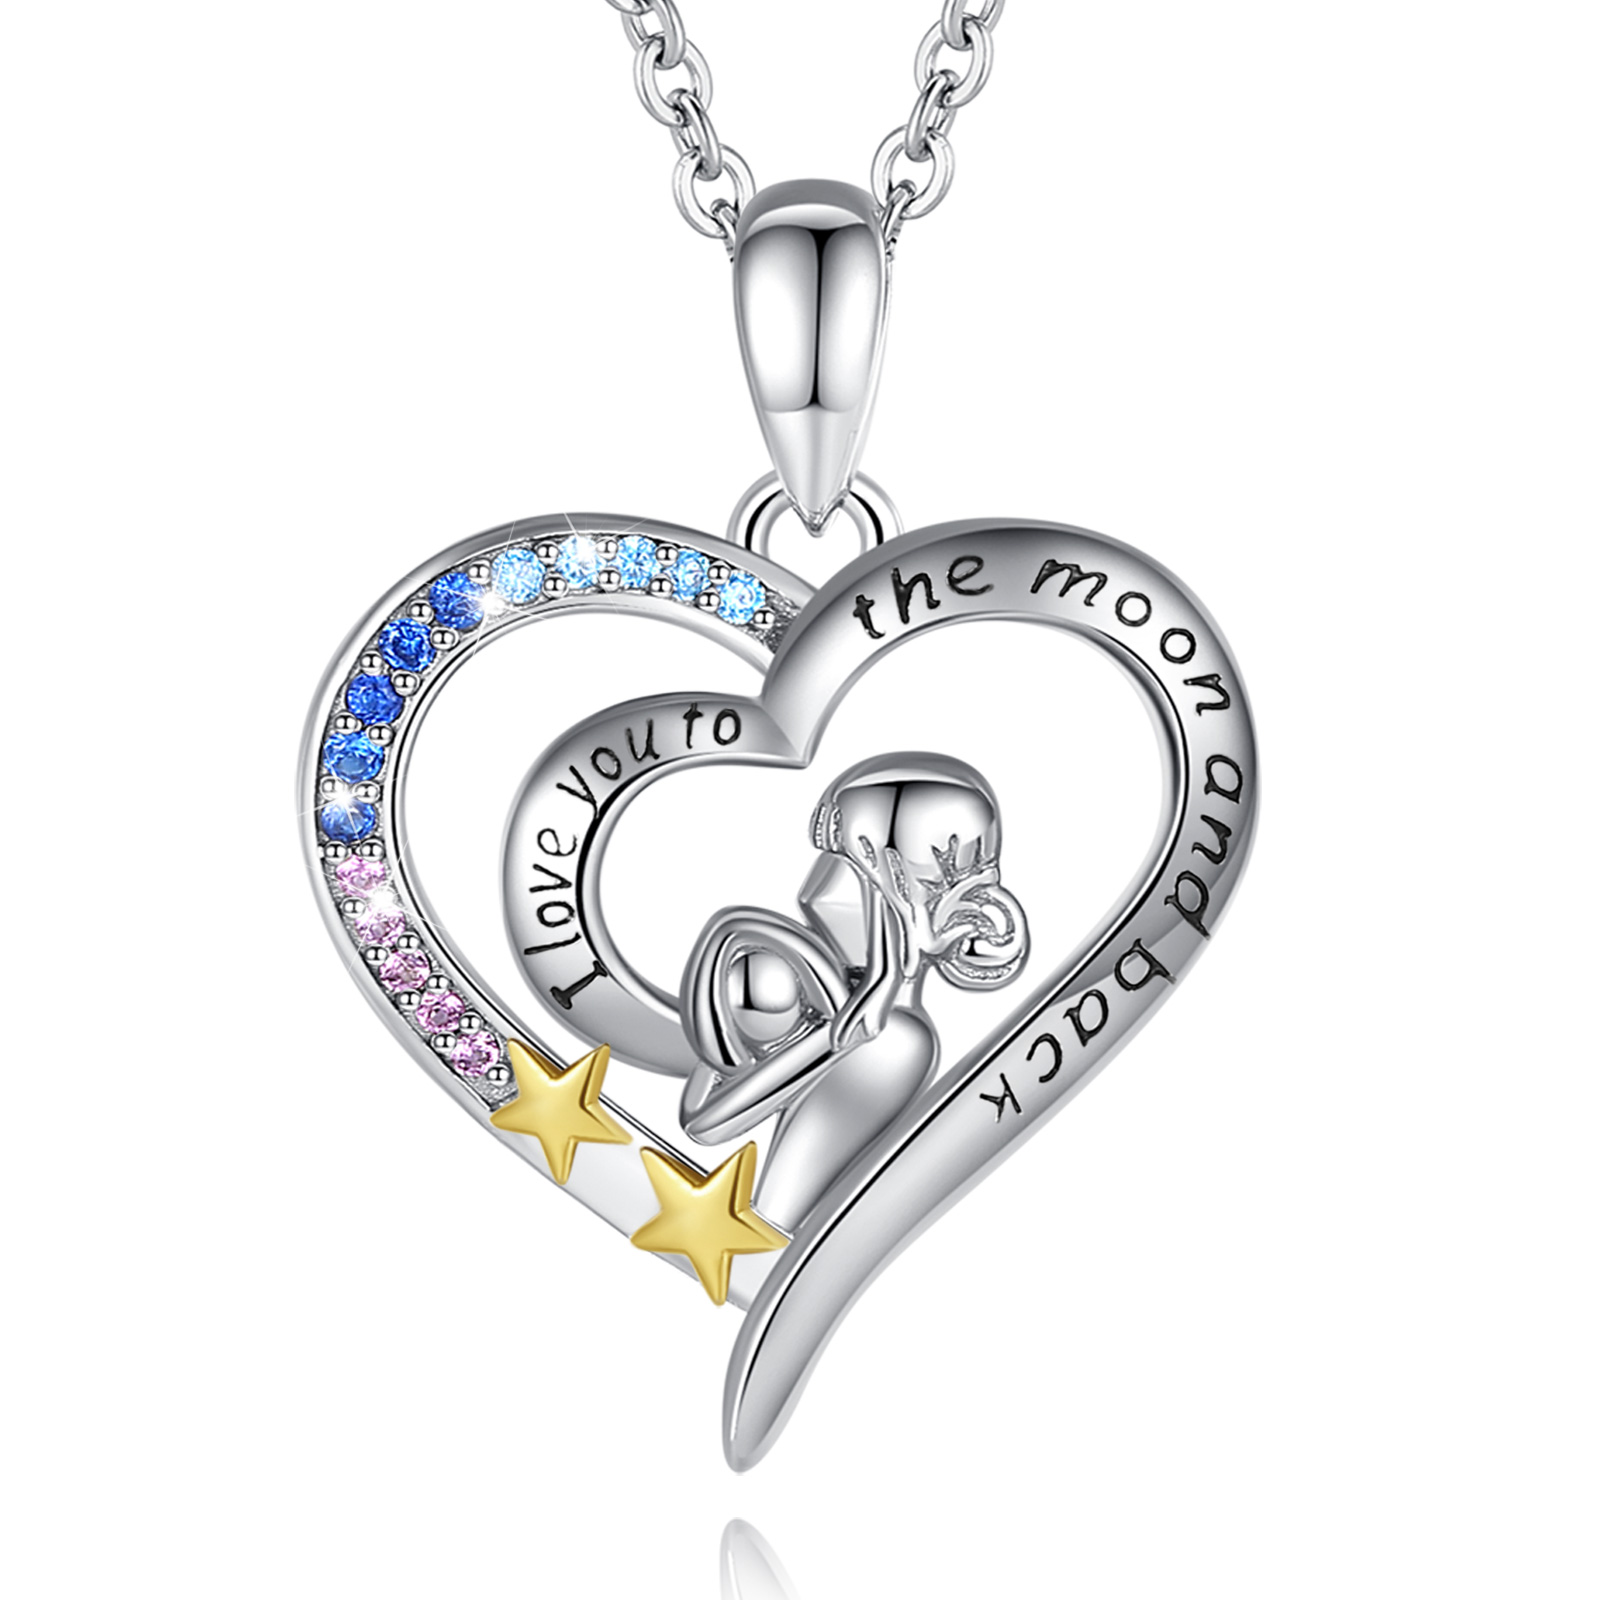 Merryshine Jewelry S925 Sterling Silver Mom and Baby Heart Shaped Necklace with Colorful Cubic Zirconia